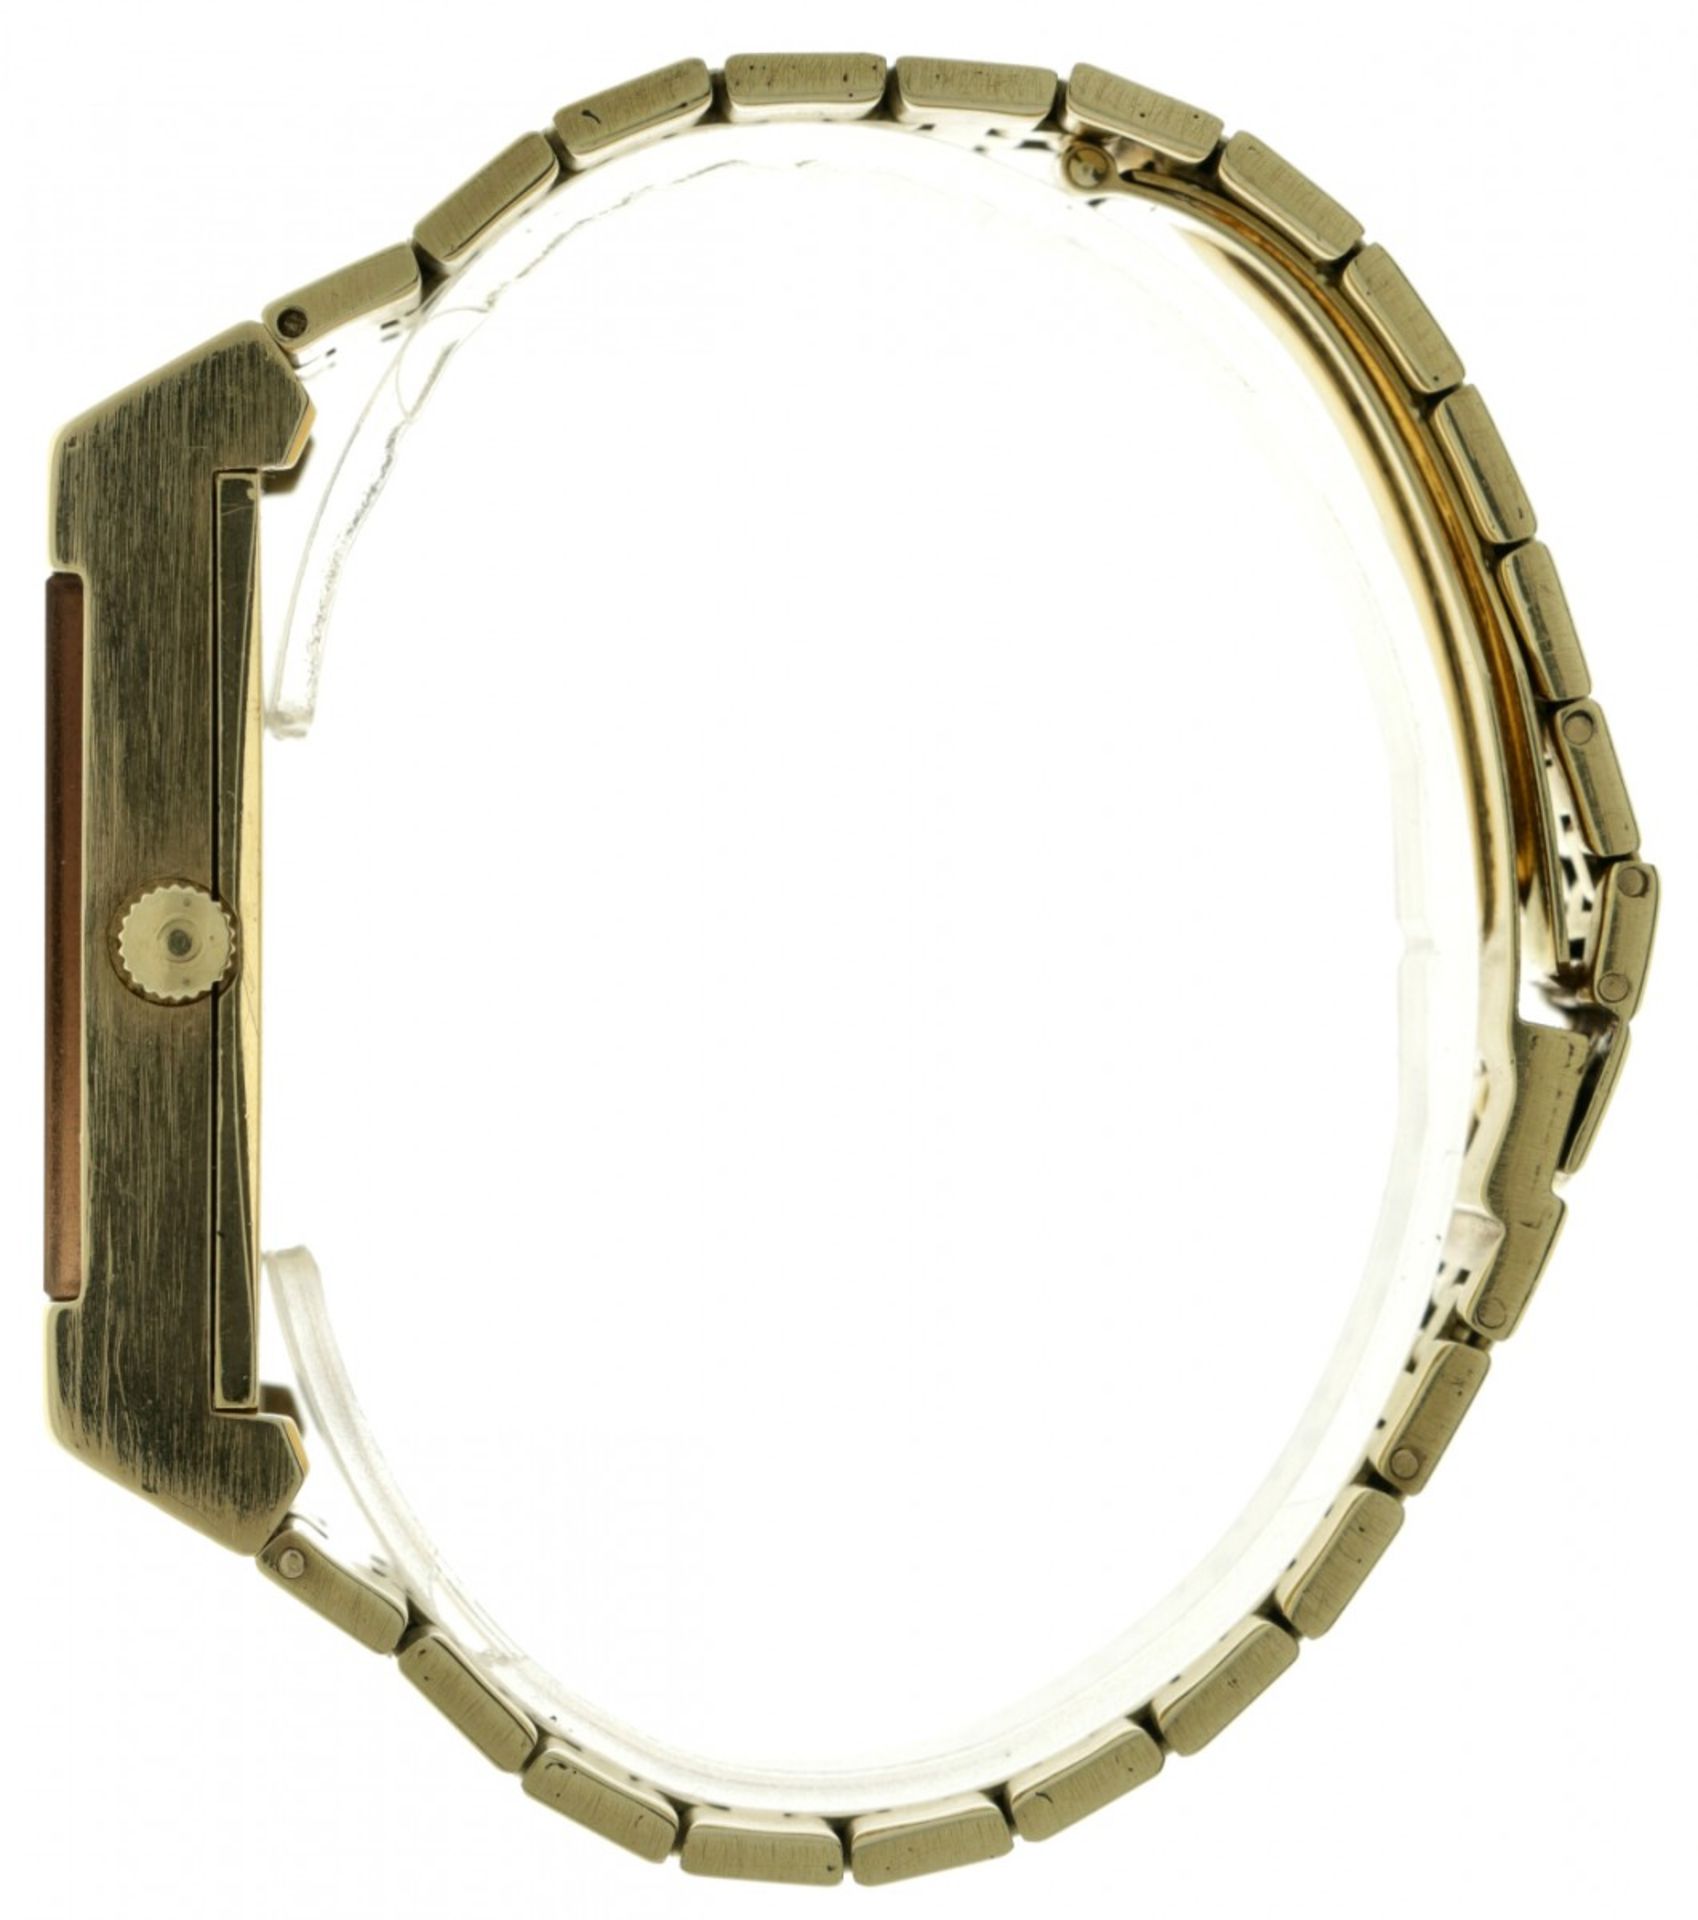 Omega Constellation 8359 - Men's Watch - approx. 1972 - Image 5 of 9